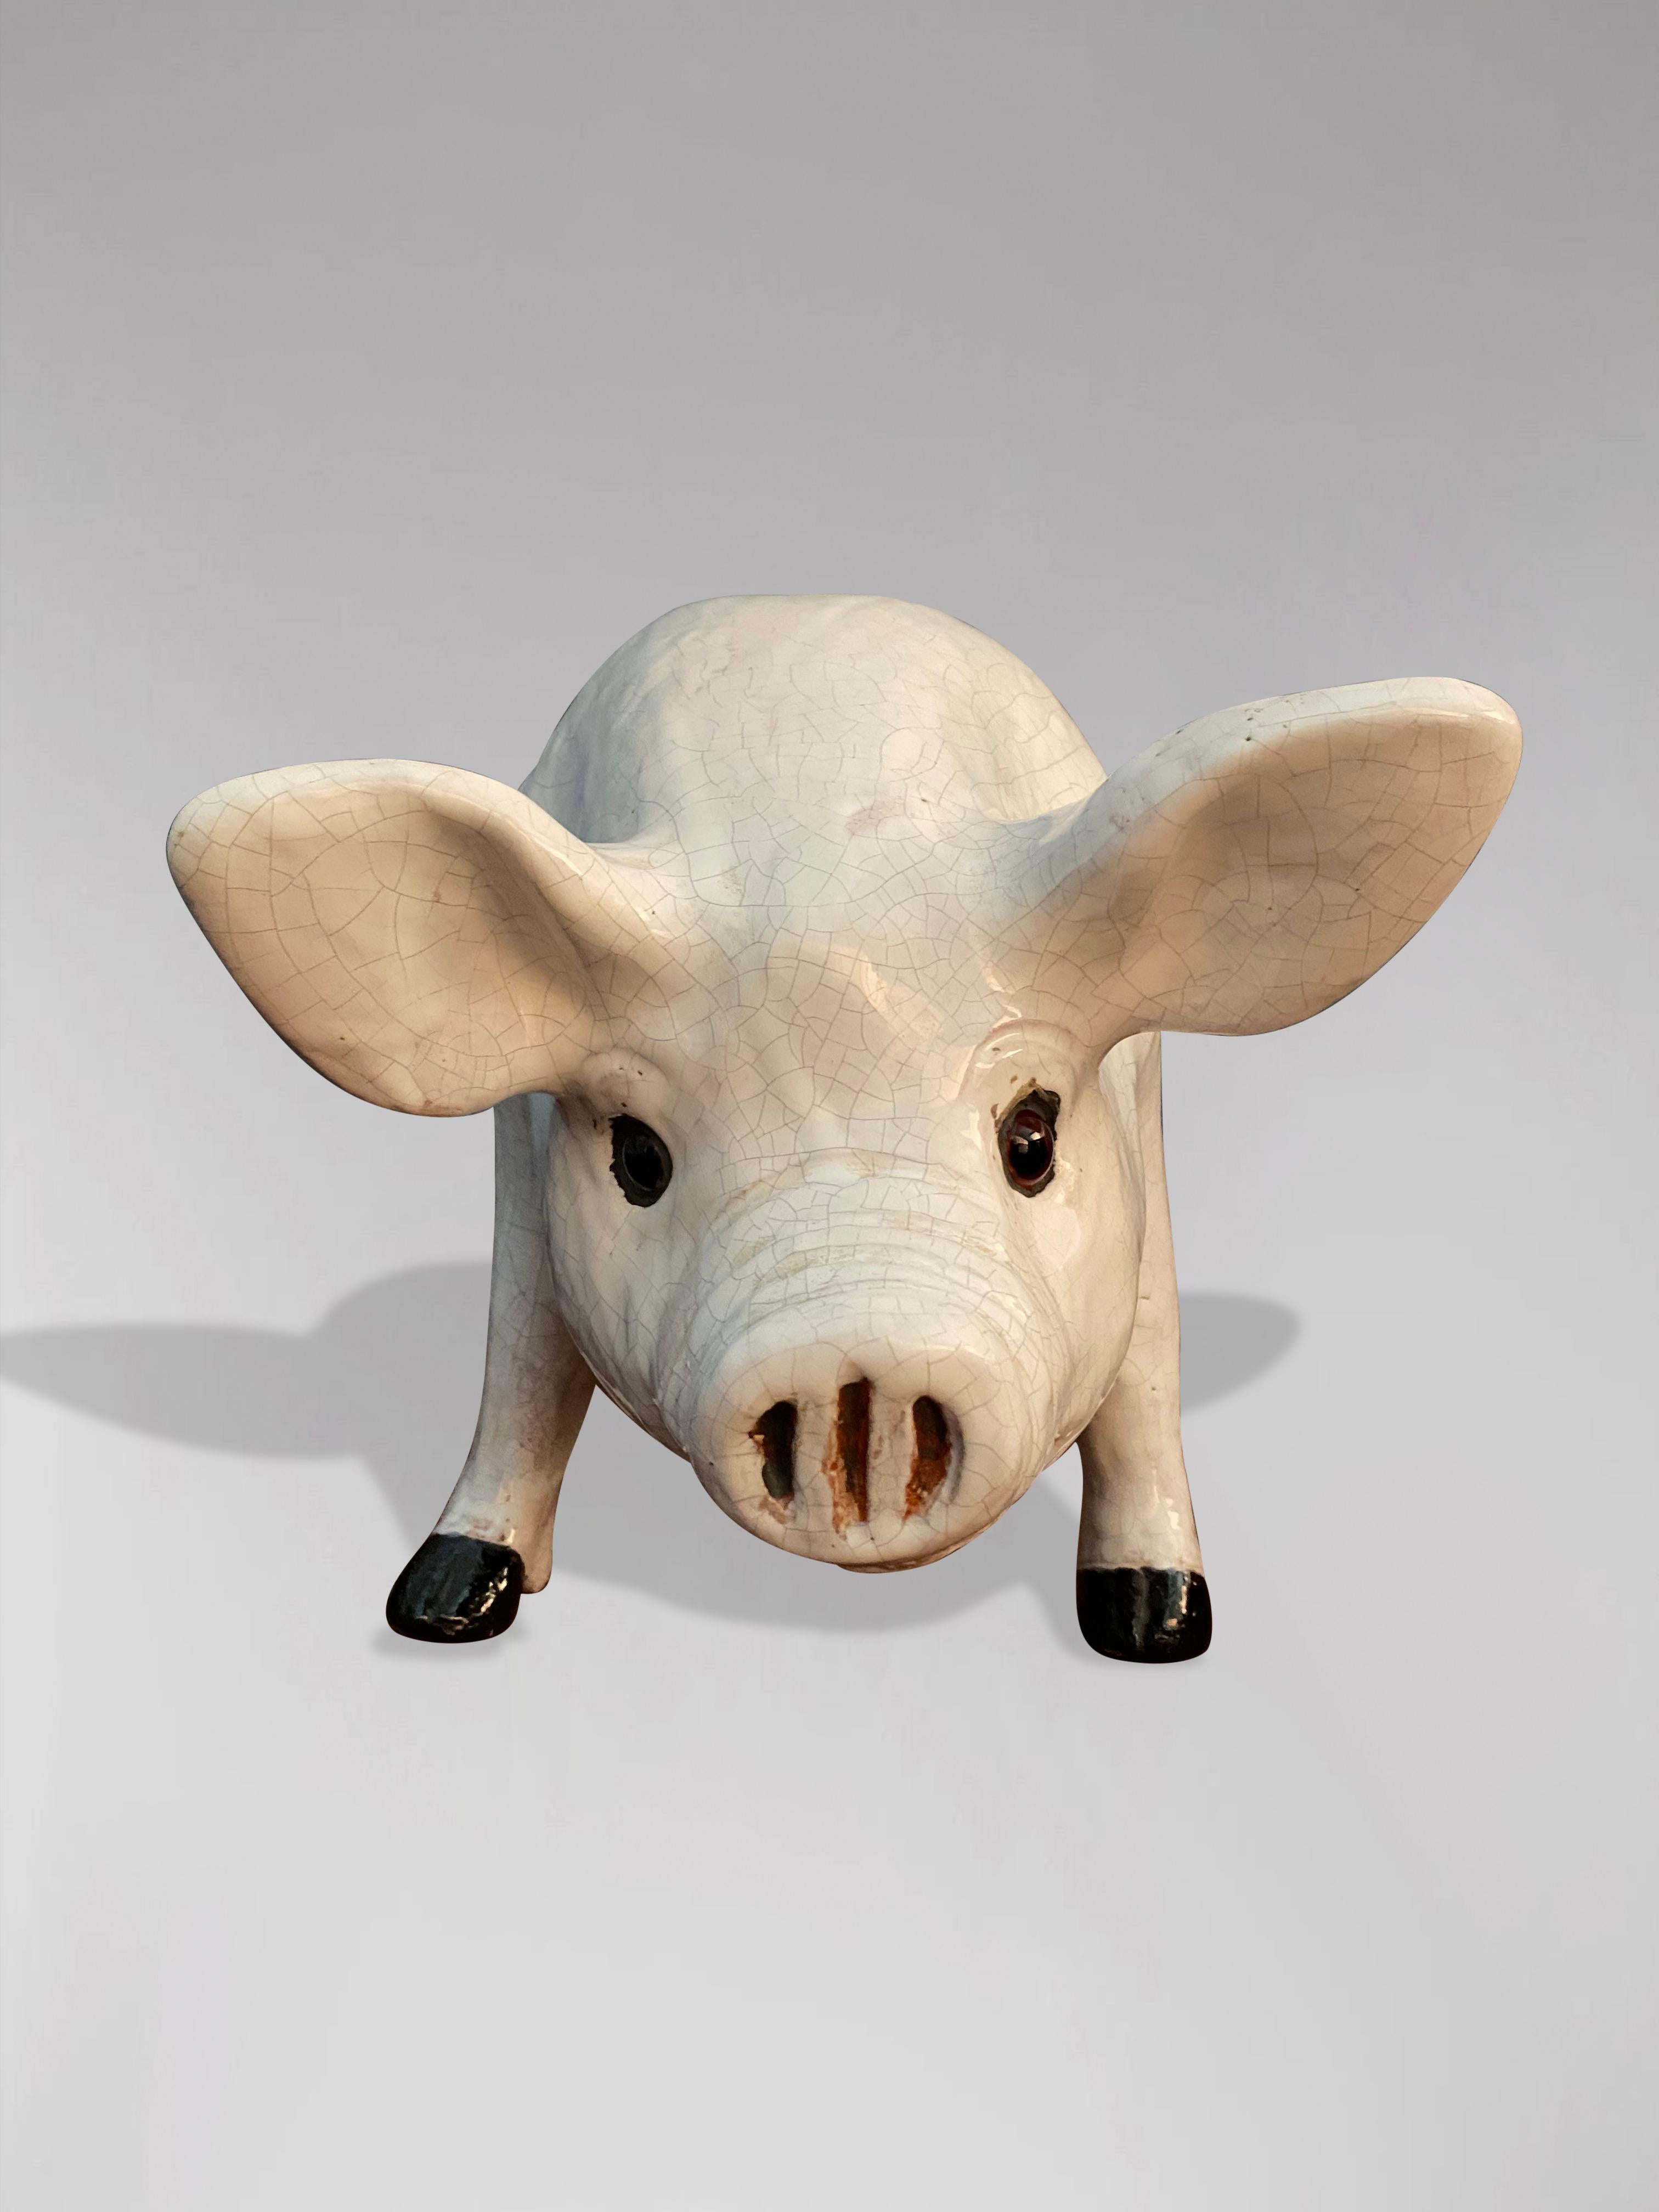 19th Century French Earthenware Pig Sculpture from Bavent in Normandy In Good Condition For Sale In Petworth,West Sussex, GB